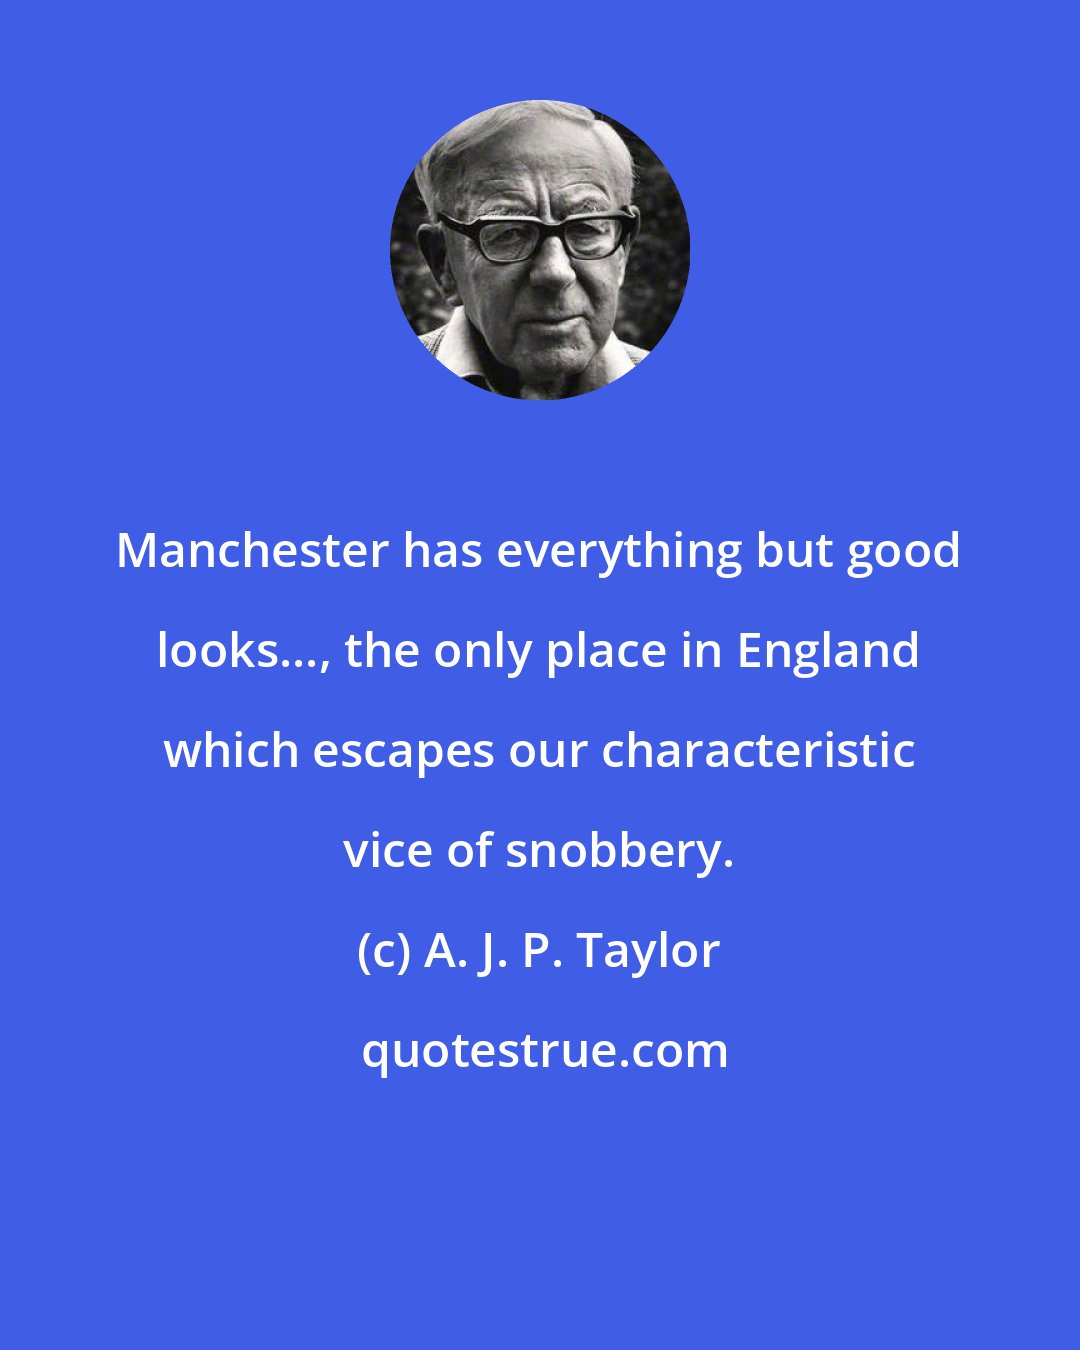 A. J. P. Taylor: Manchester has everything but good looks..., the only place in England which escapes our characteristic vice of snobbery.